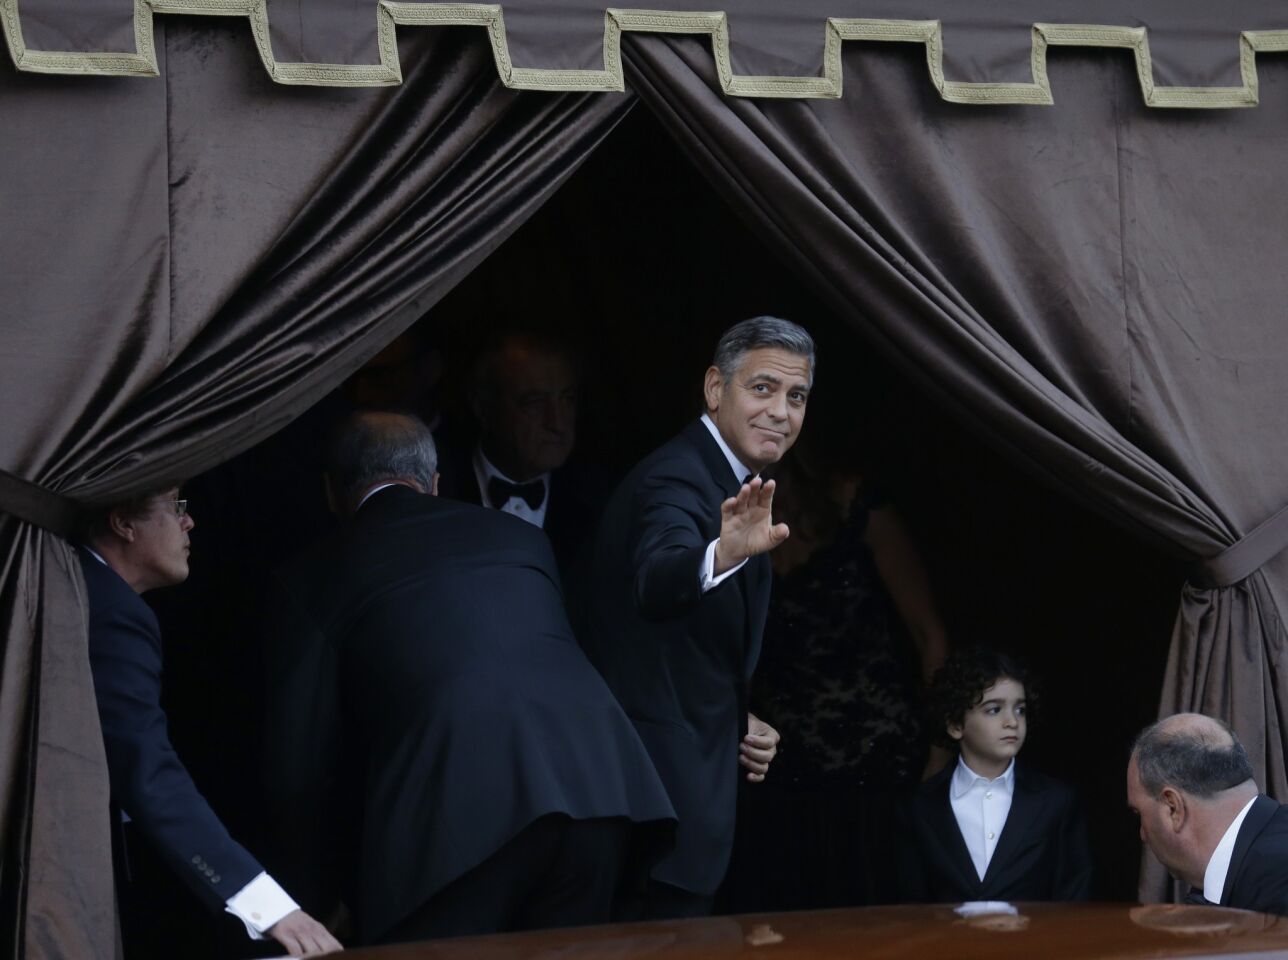 George Clooney arrives Saturday at Venice's Aman Canal Grande hotel, where he and Amal Alamuddin will celebrate their marriage.